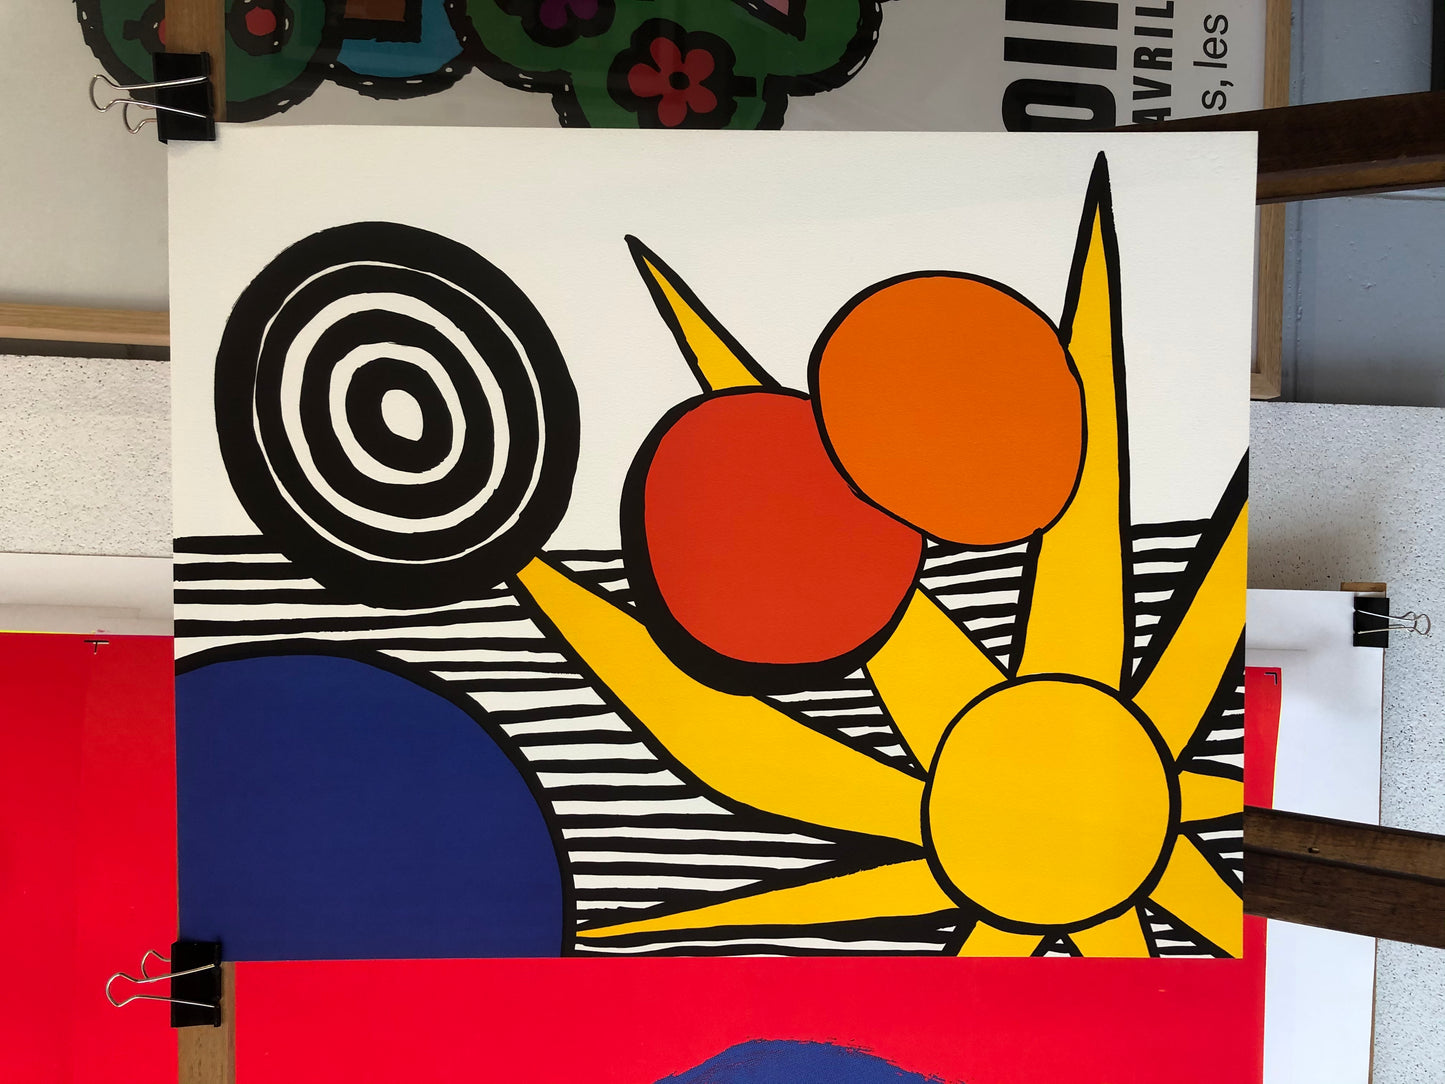 Calder Lithograph, "Sun with Planets"